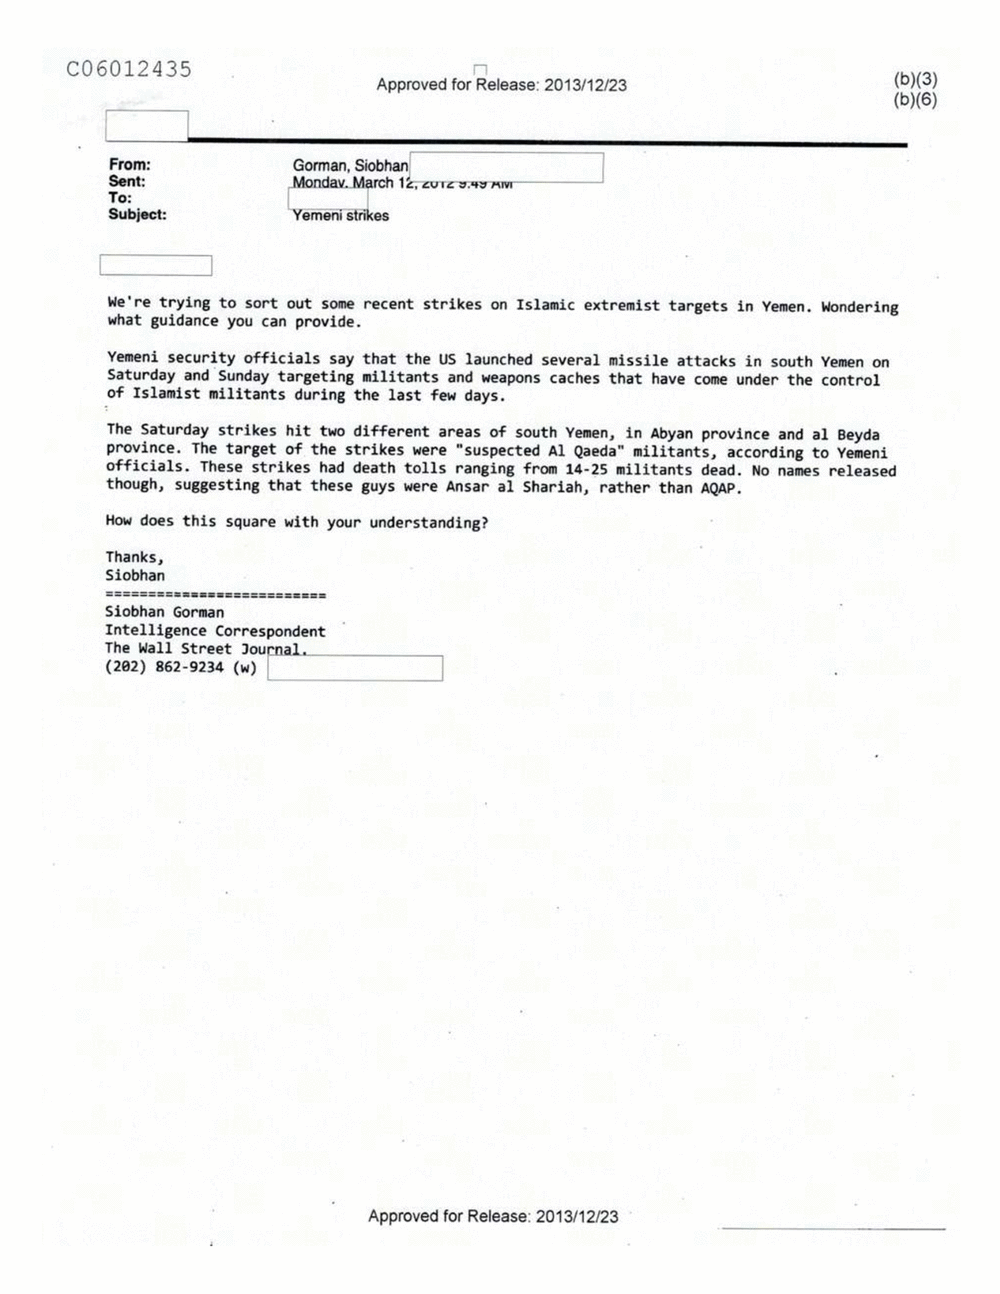 Page 15 from Email Correspondence Between Reporters and CIA Flacks